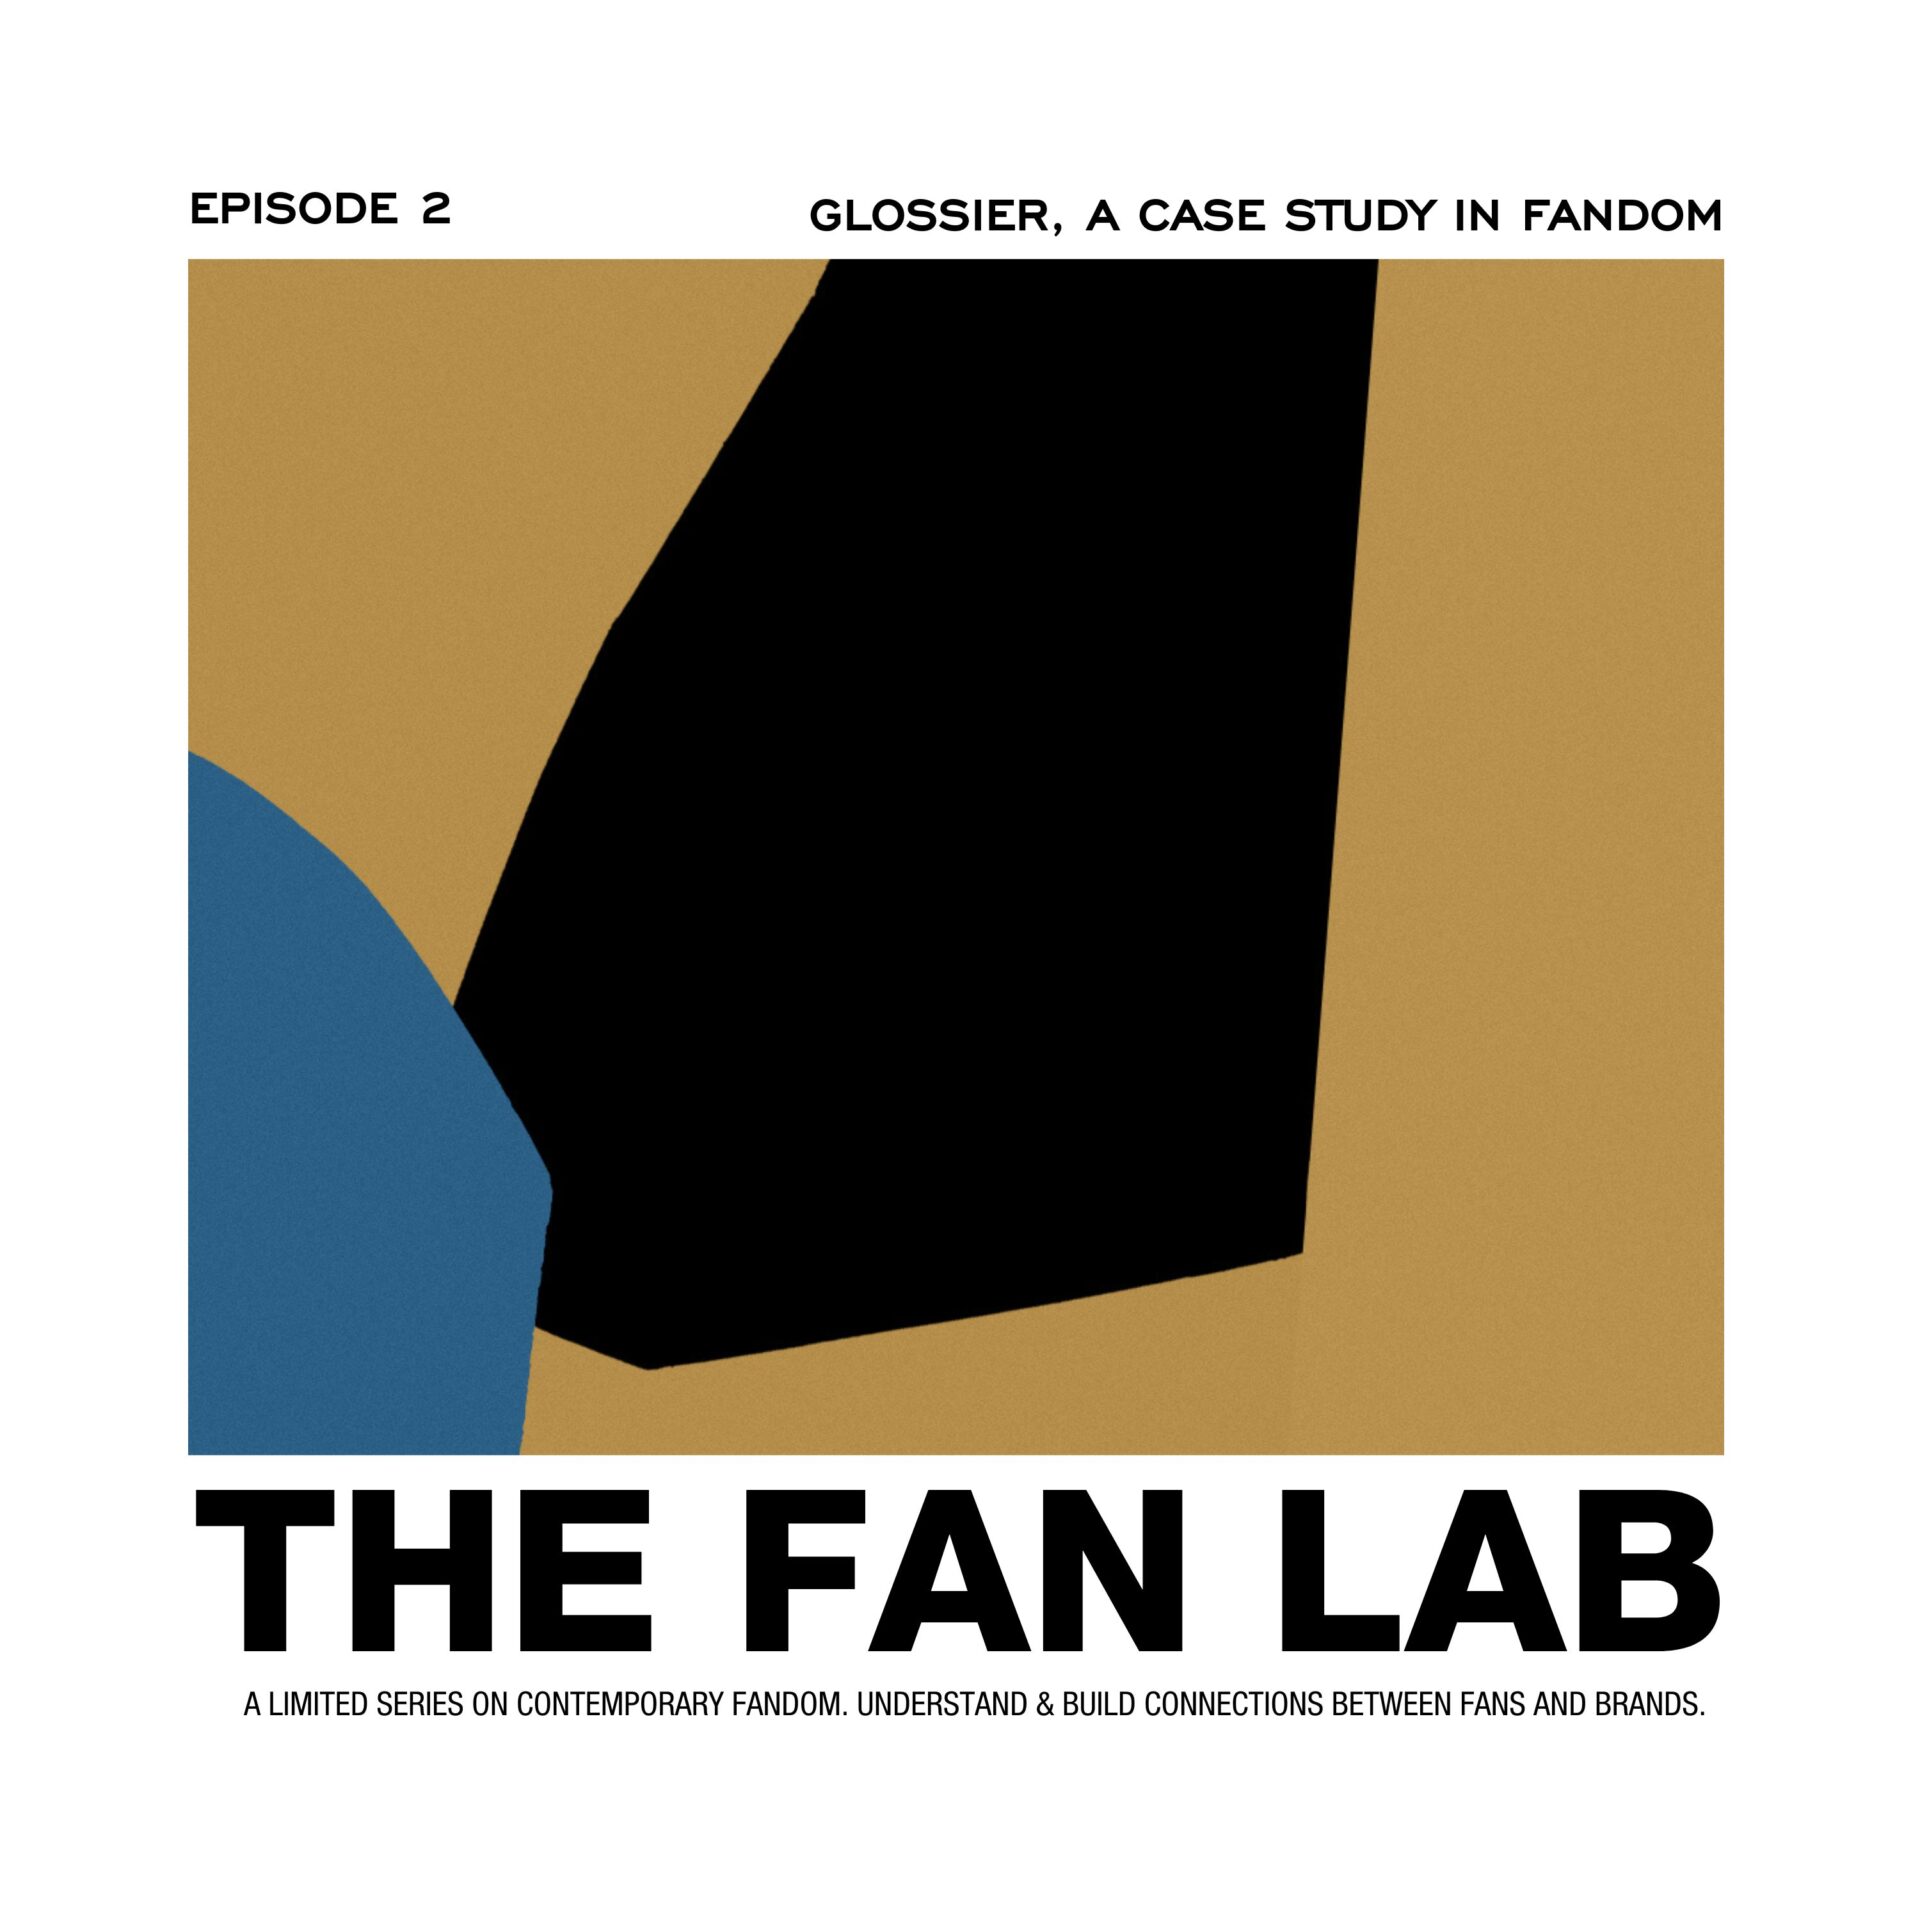 The Fan Lab is a podcast examining fandom. In this episode we use Glossier as a case study.